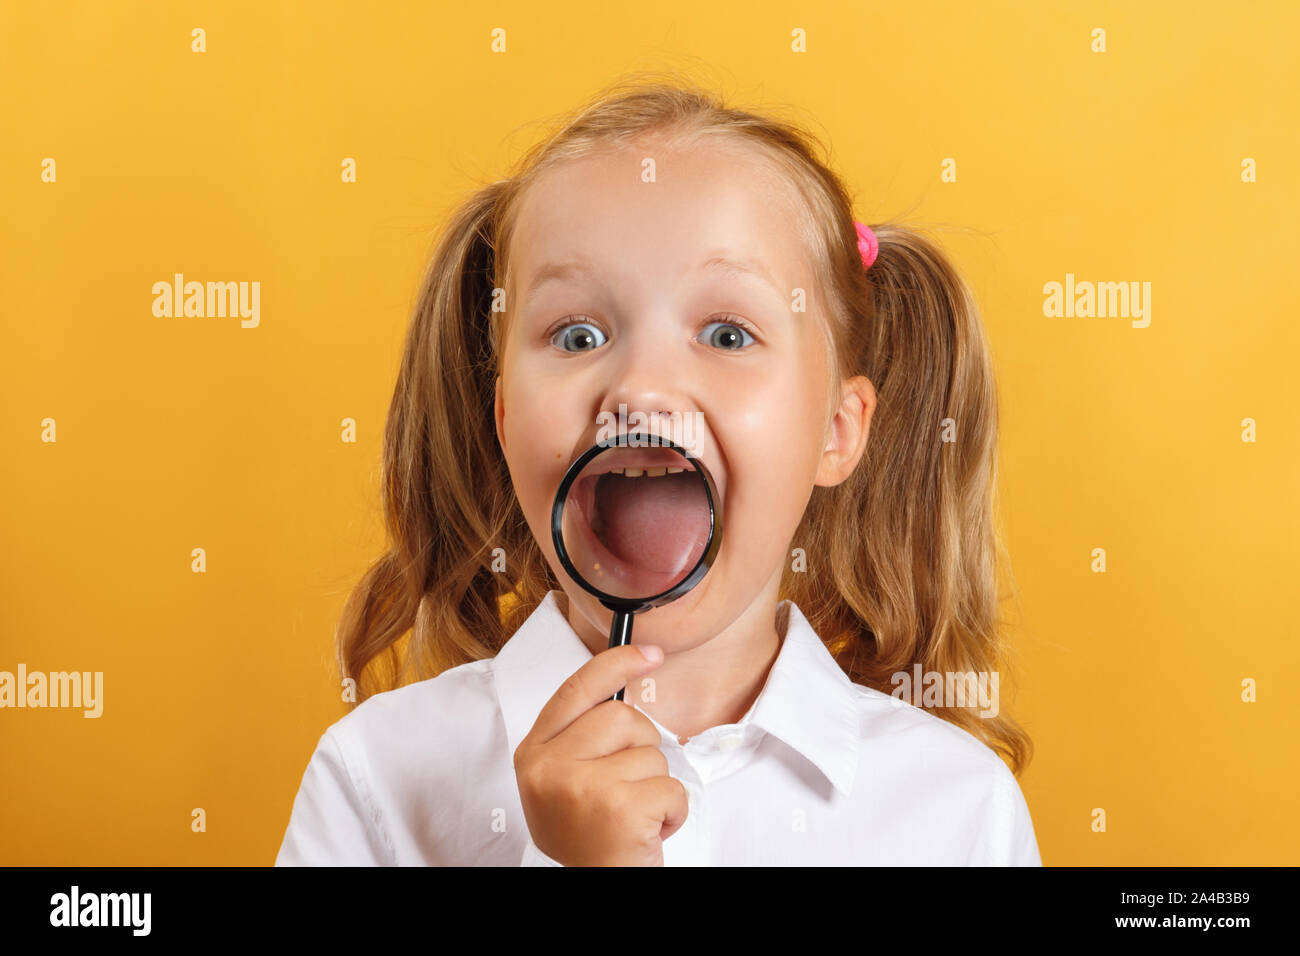 Cheerful schoolgirl little girl shows teeth and smiles through a magnifying glass. A child on a yellow background. Stock Photo